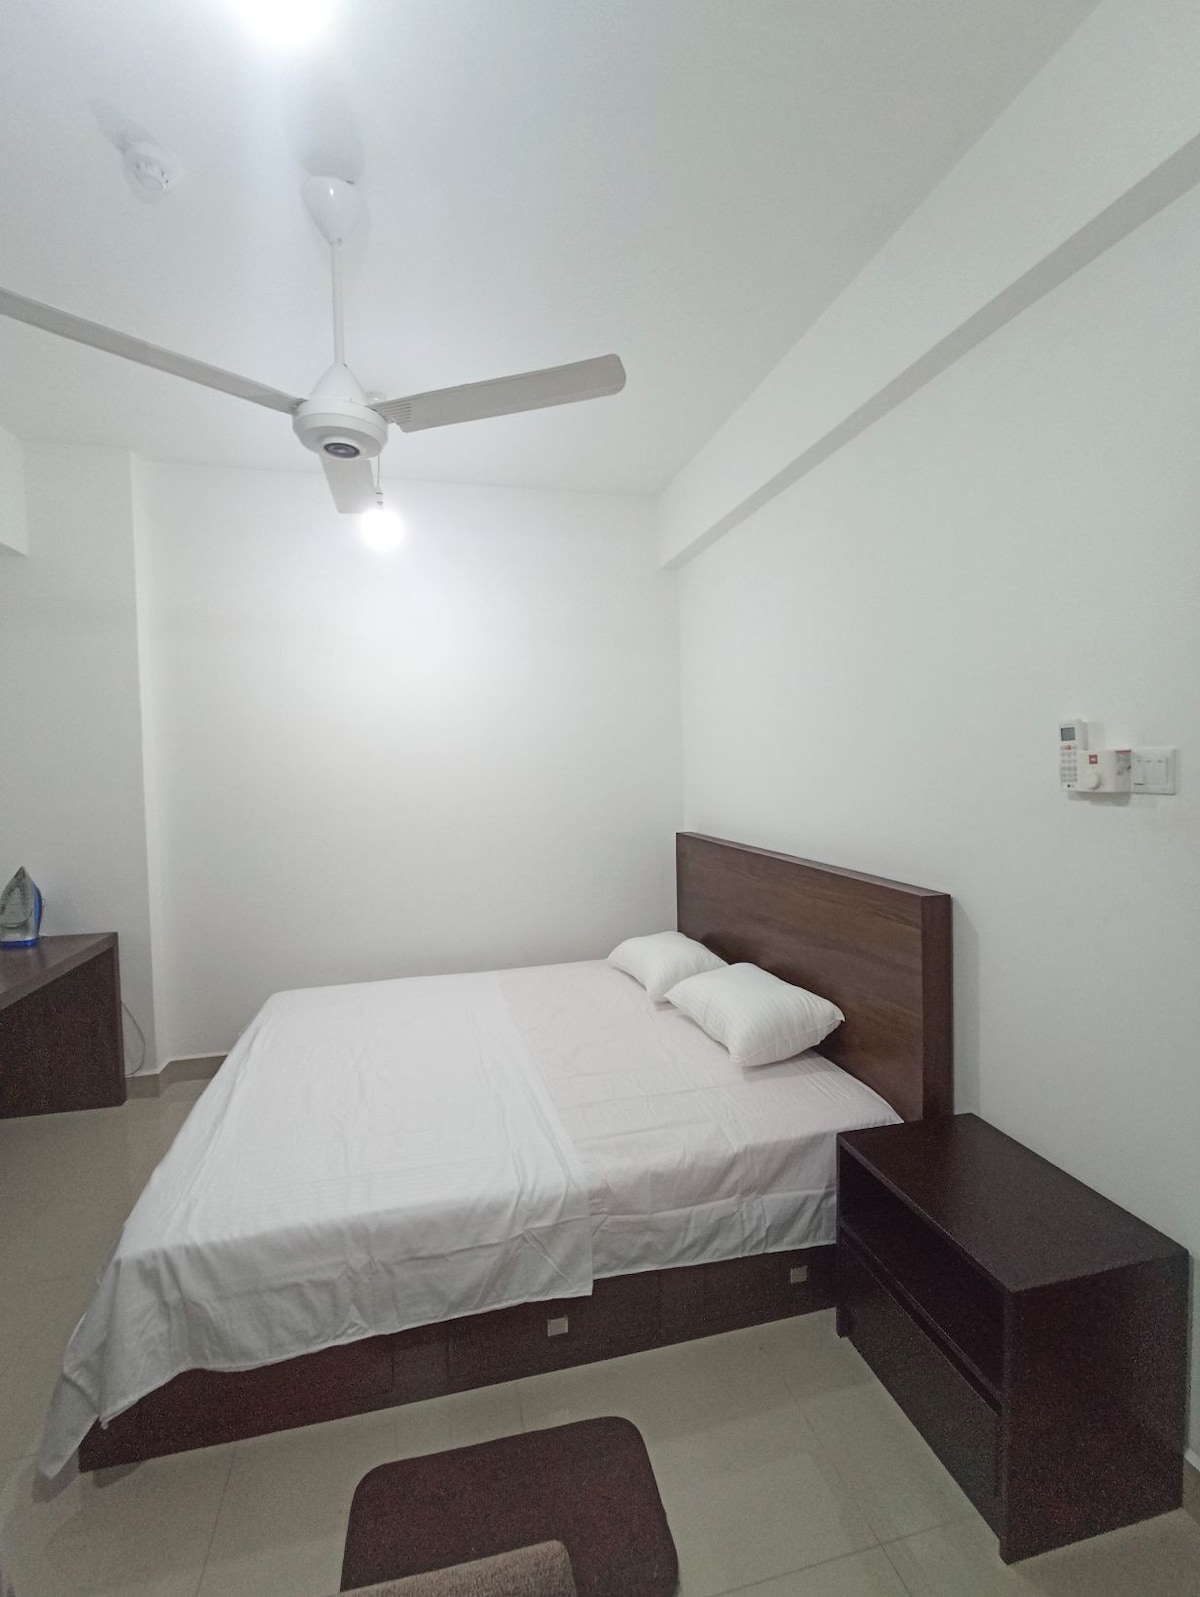 A Room for Rent in Borella, Colombo 08